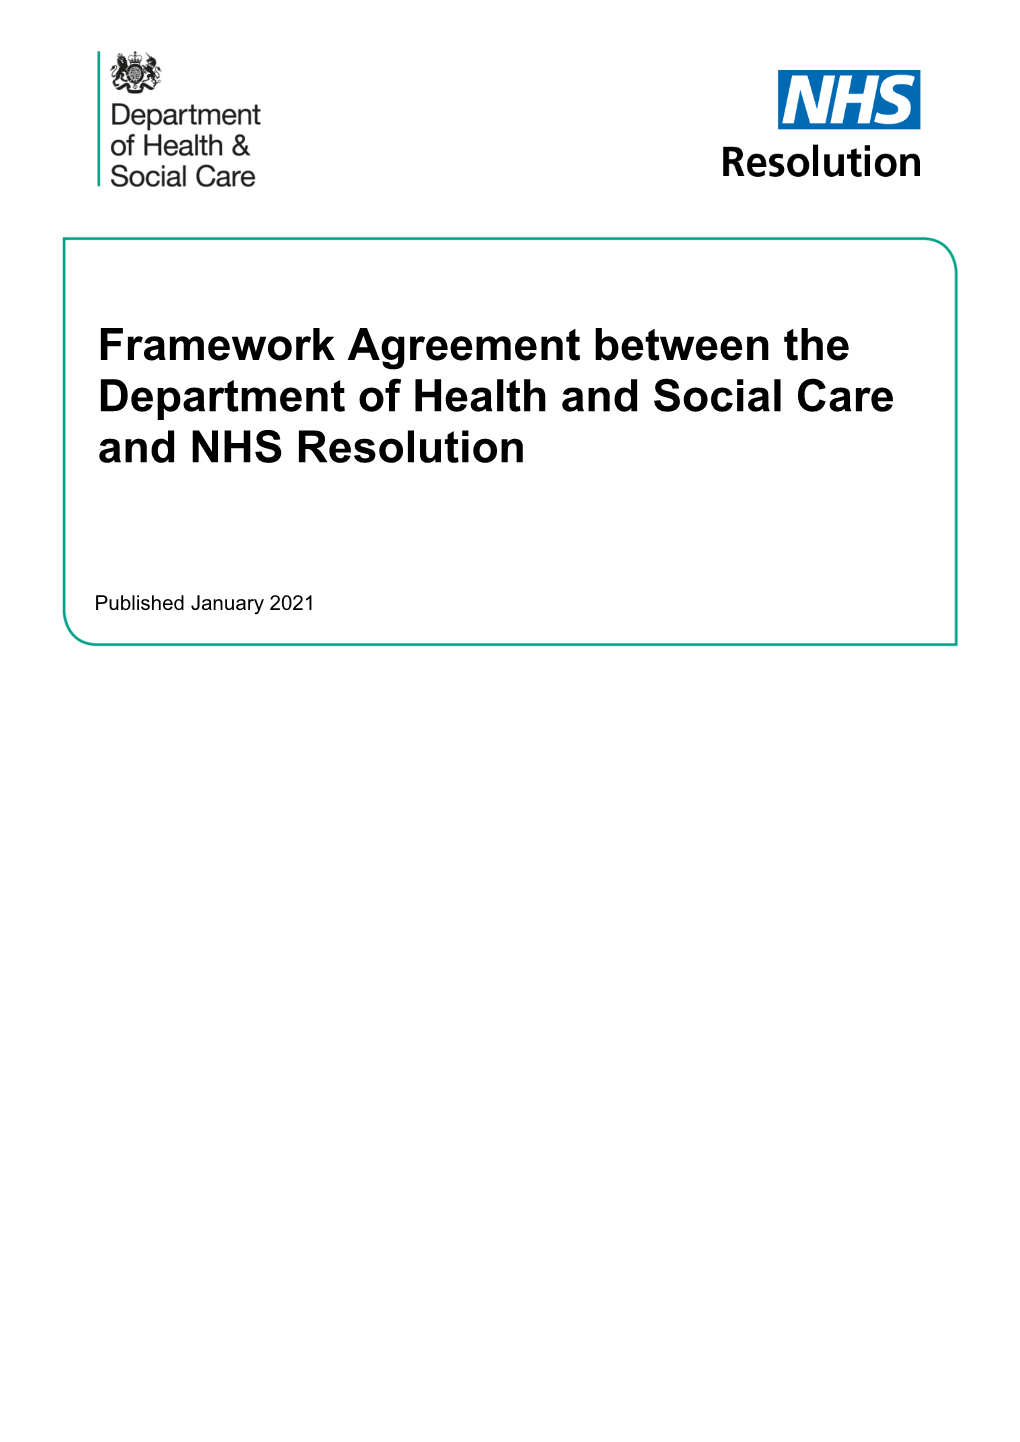 Framework Agreement Between the Department of Health and Social Care and NHS Resolution